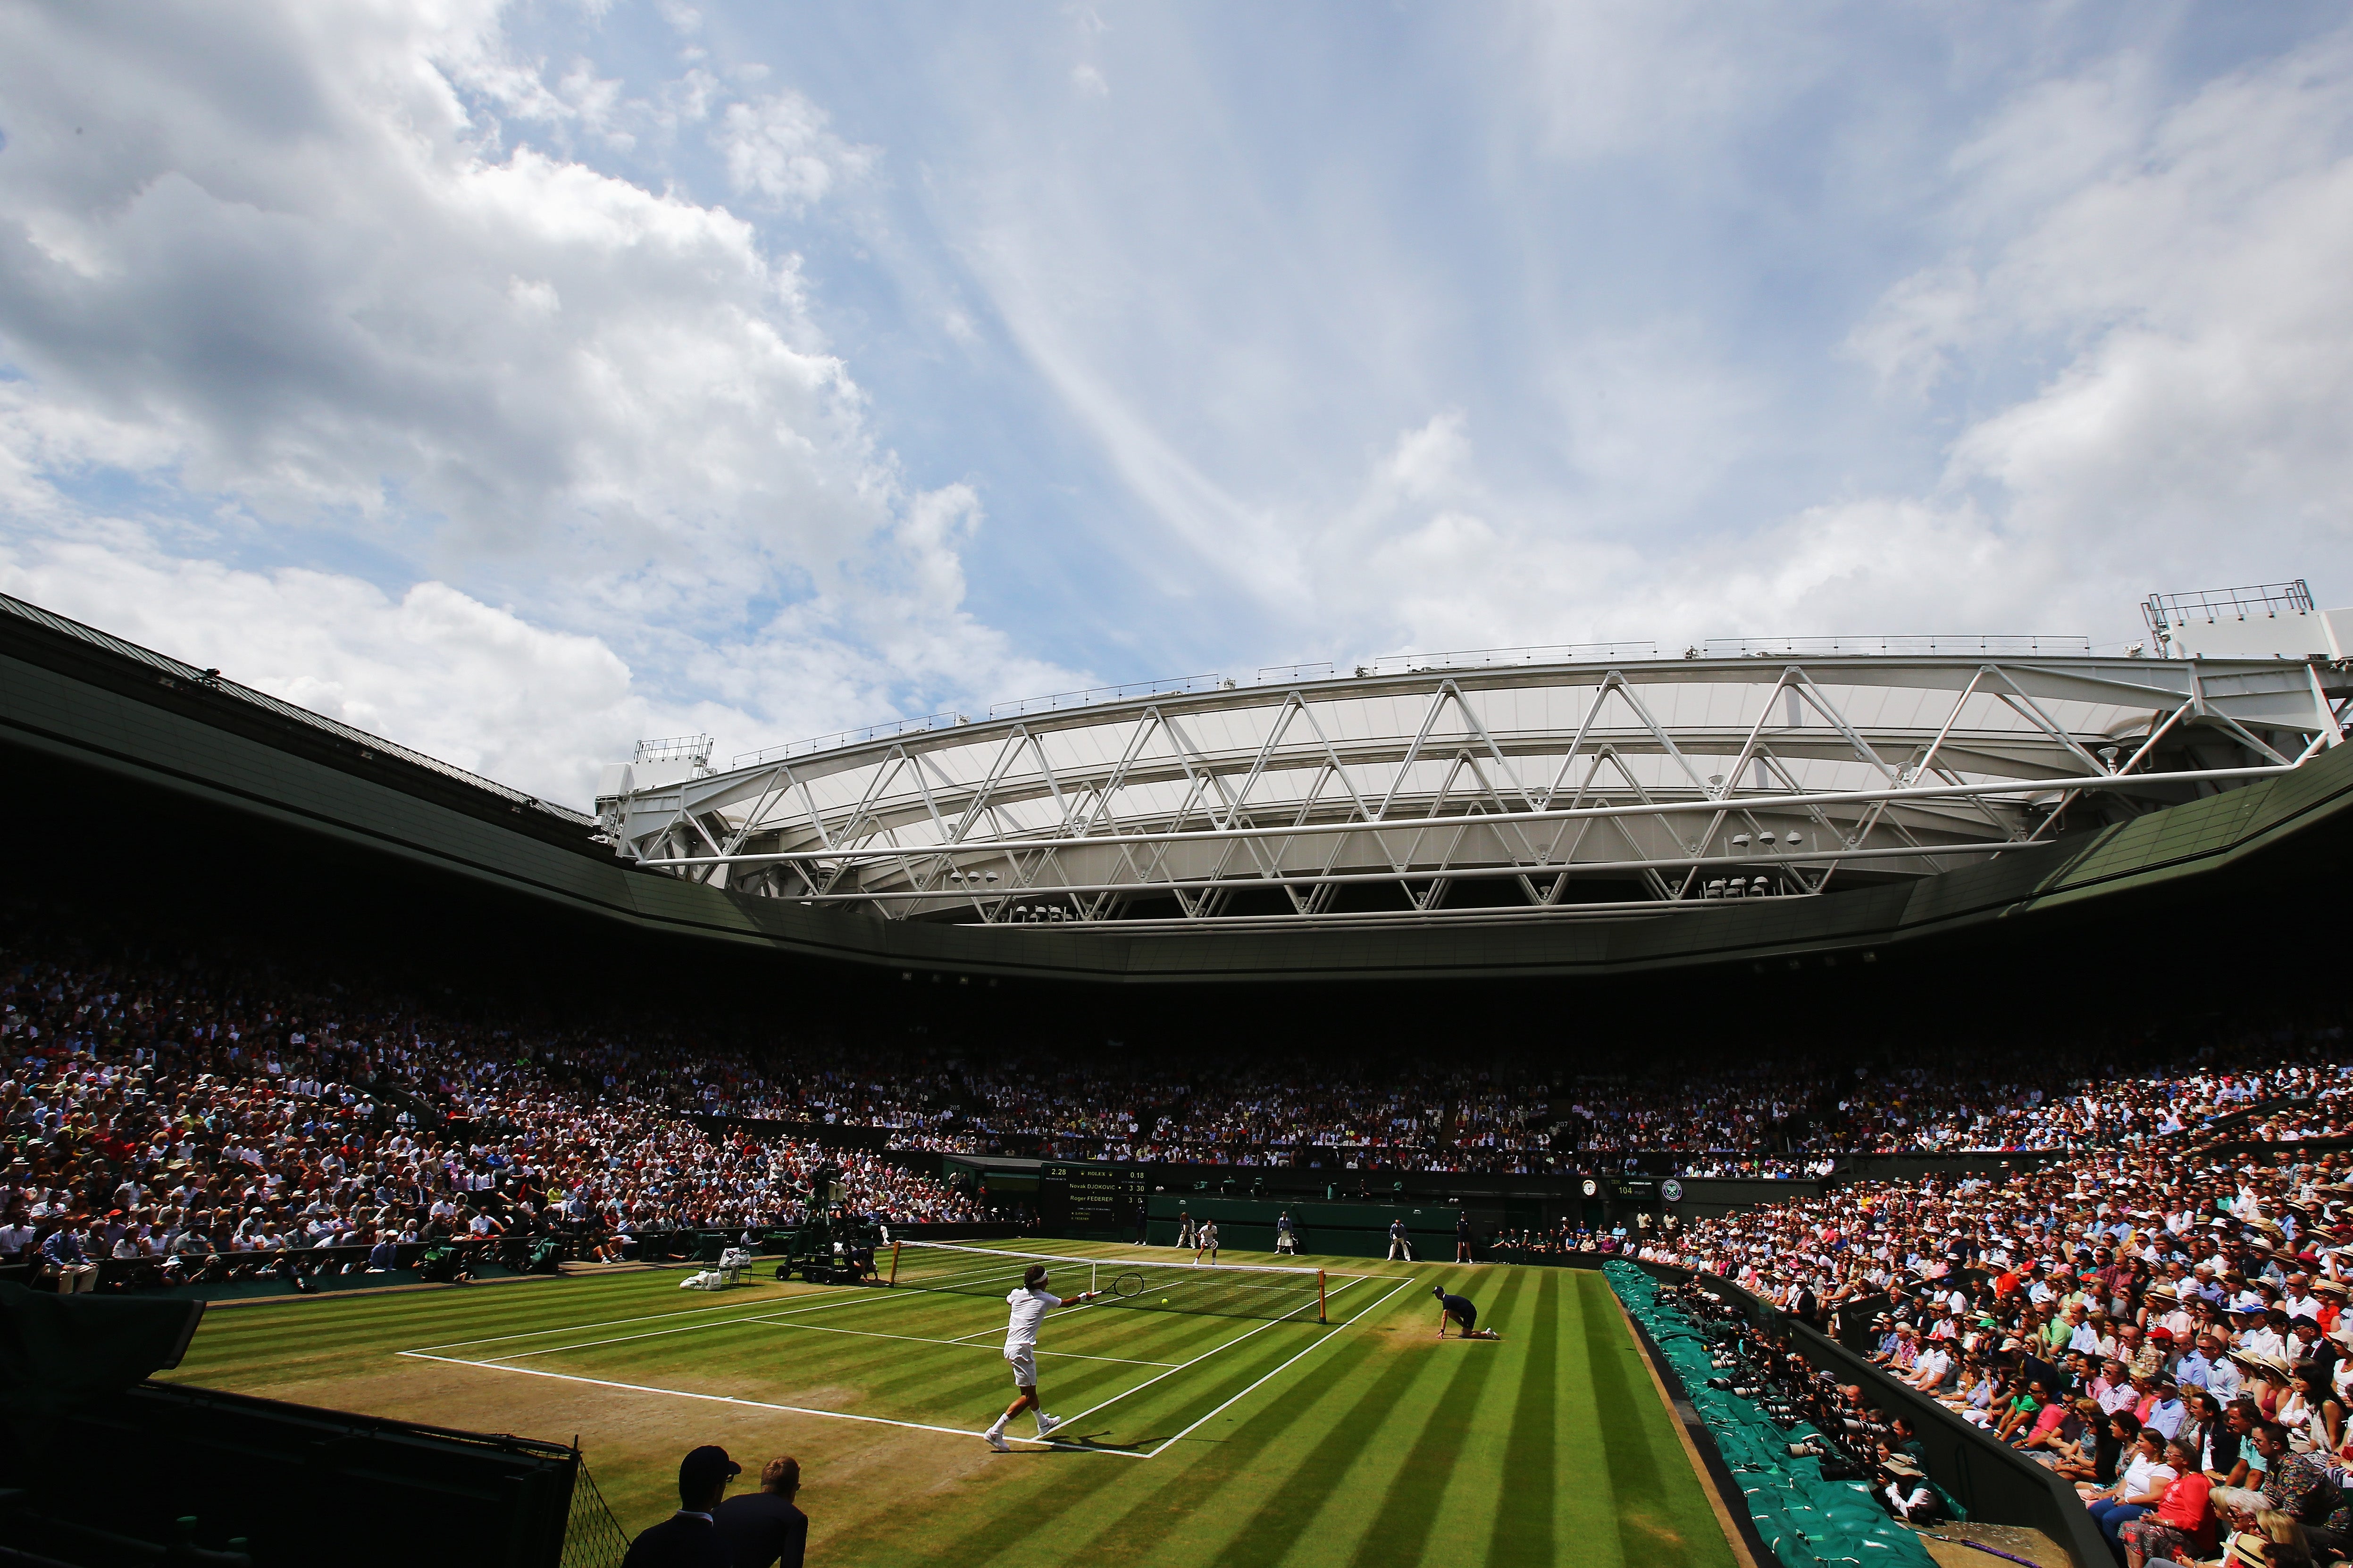 Adults are looking forward to Wimbledon, says poll